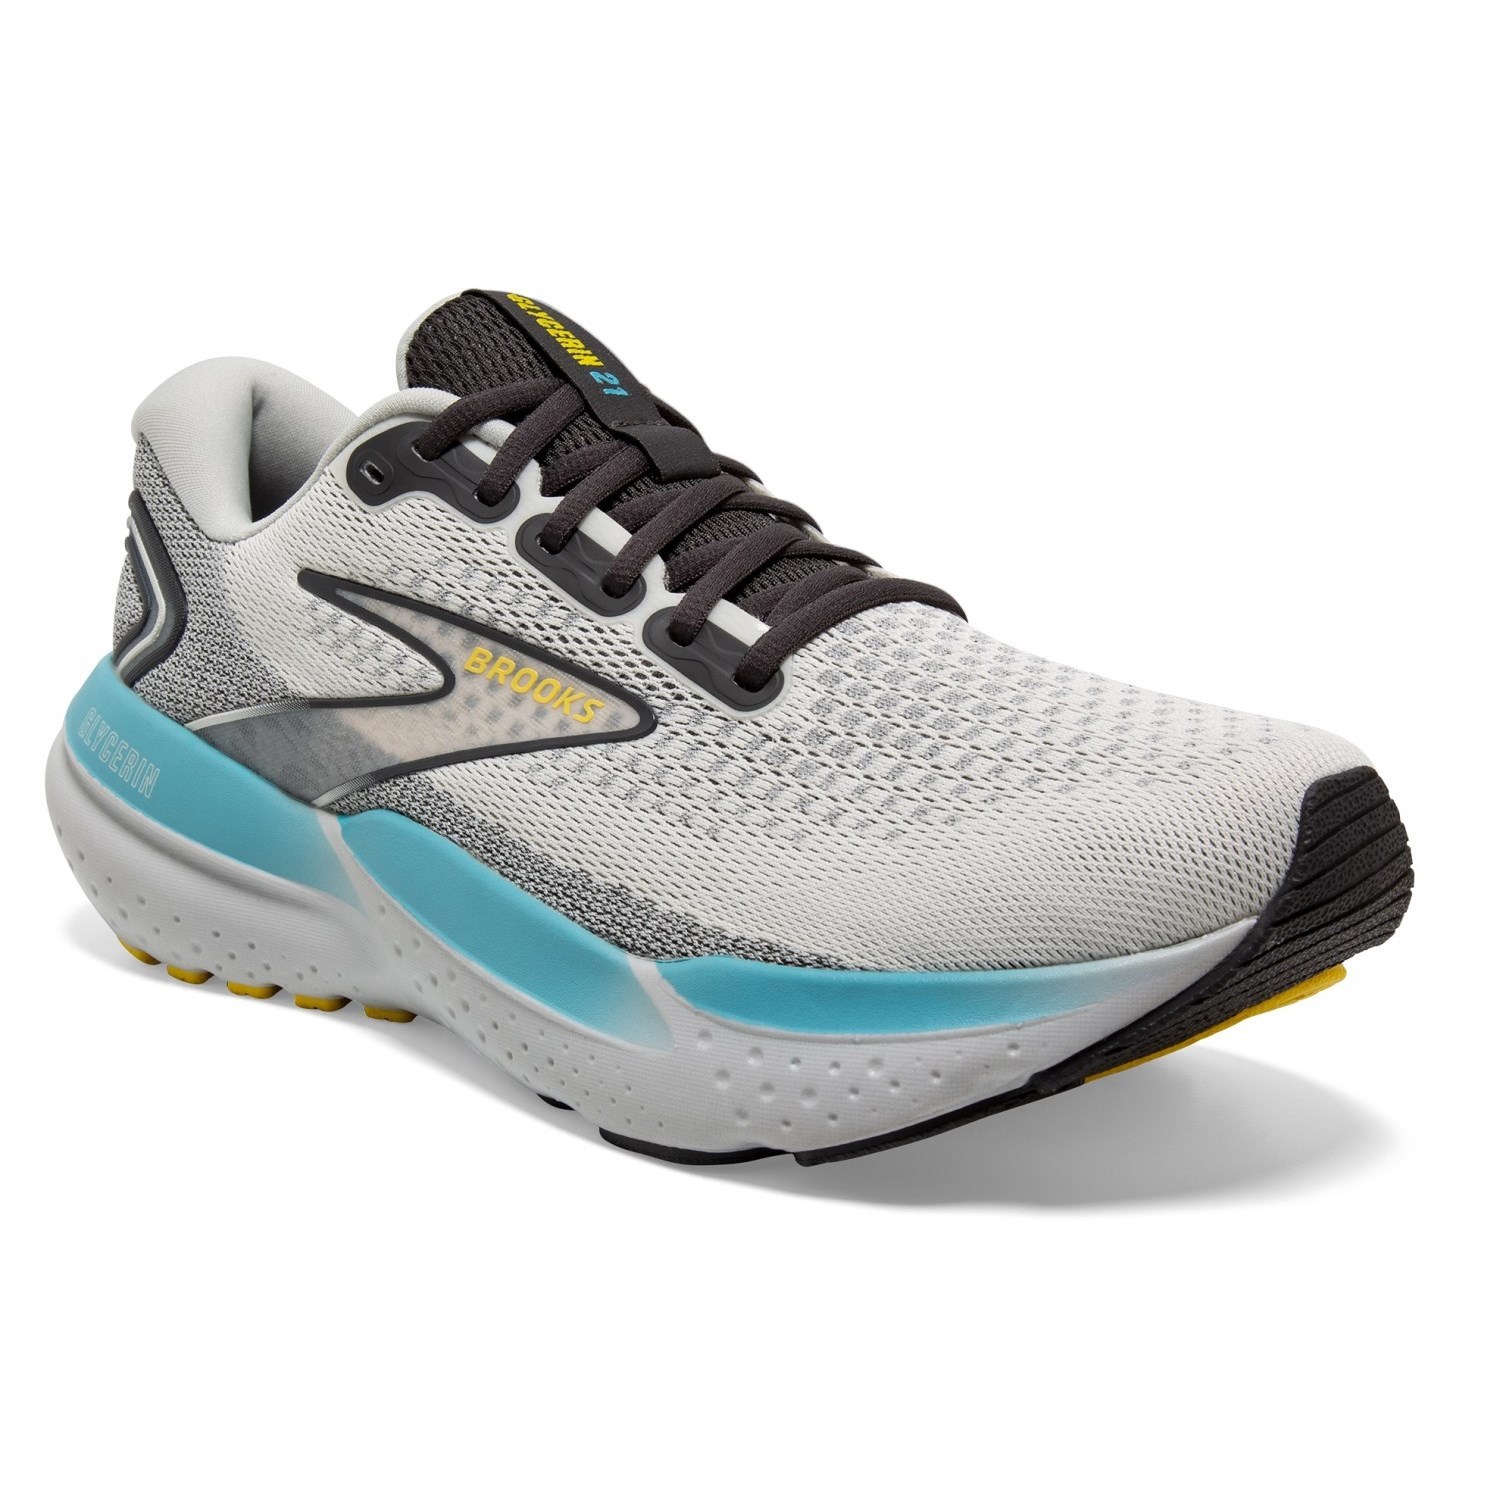 Brooks Glycerin 21 - Mens Running Shoes - Coconut/Forged Iron/Yellow ...